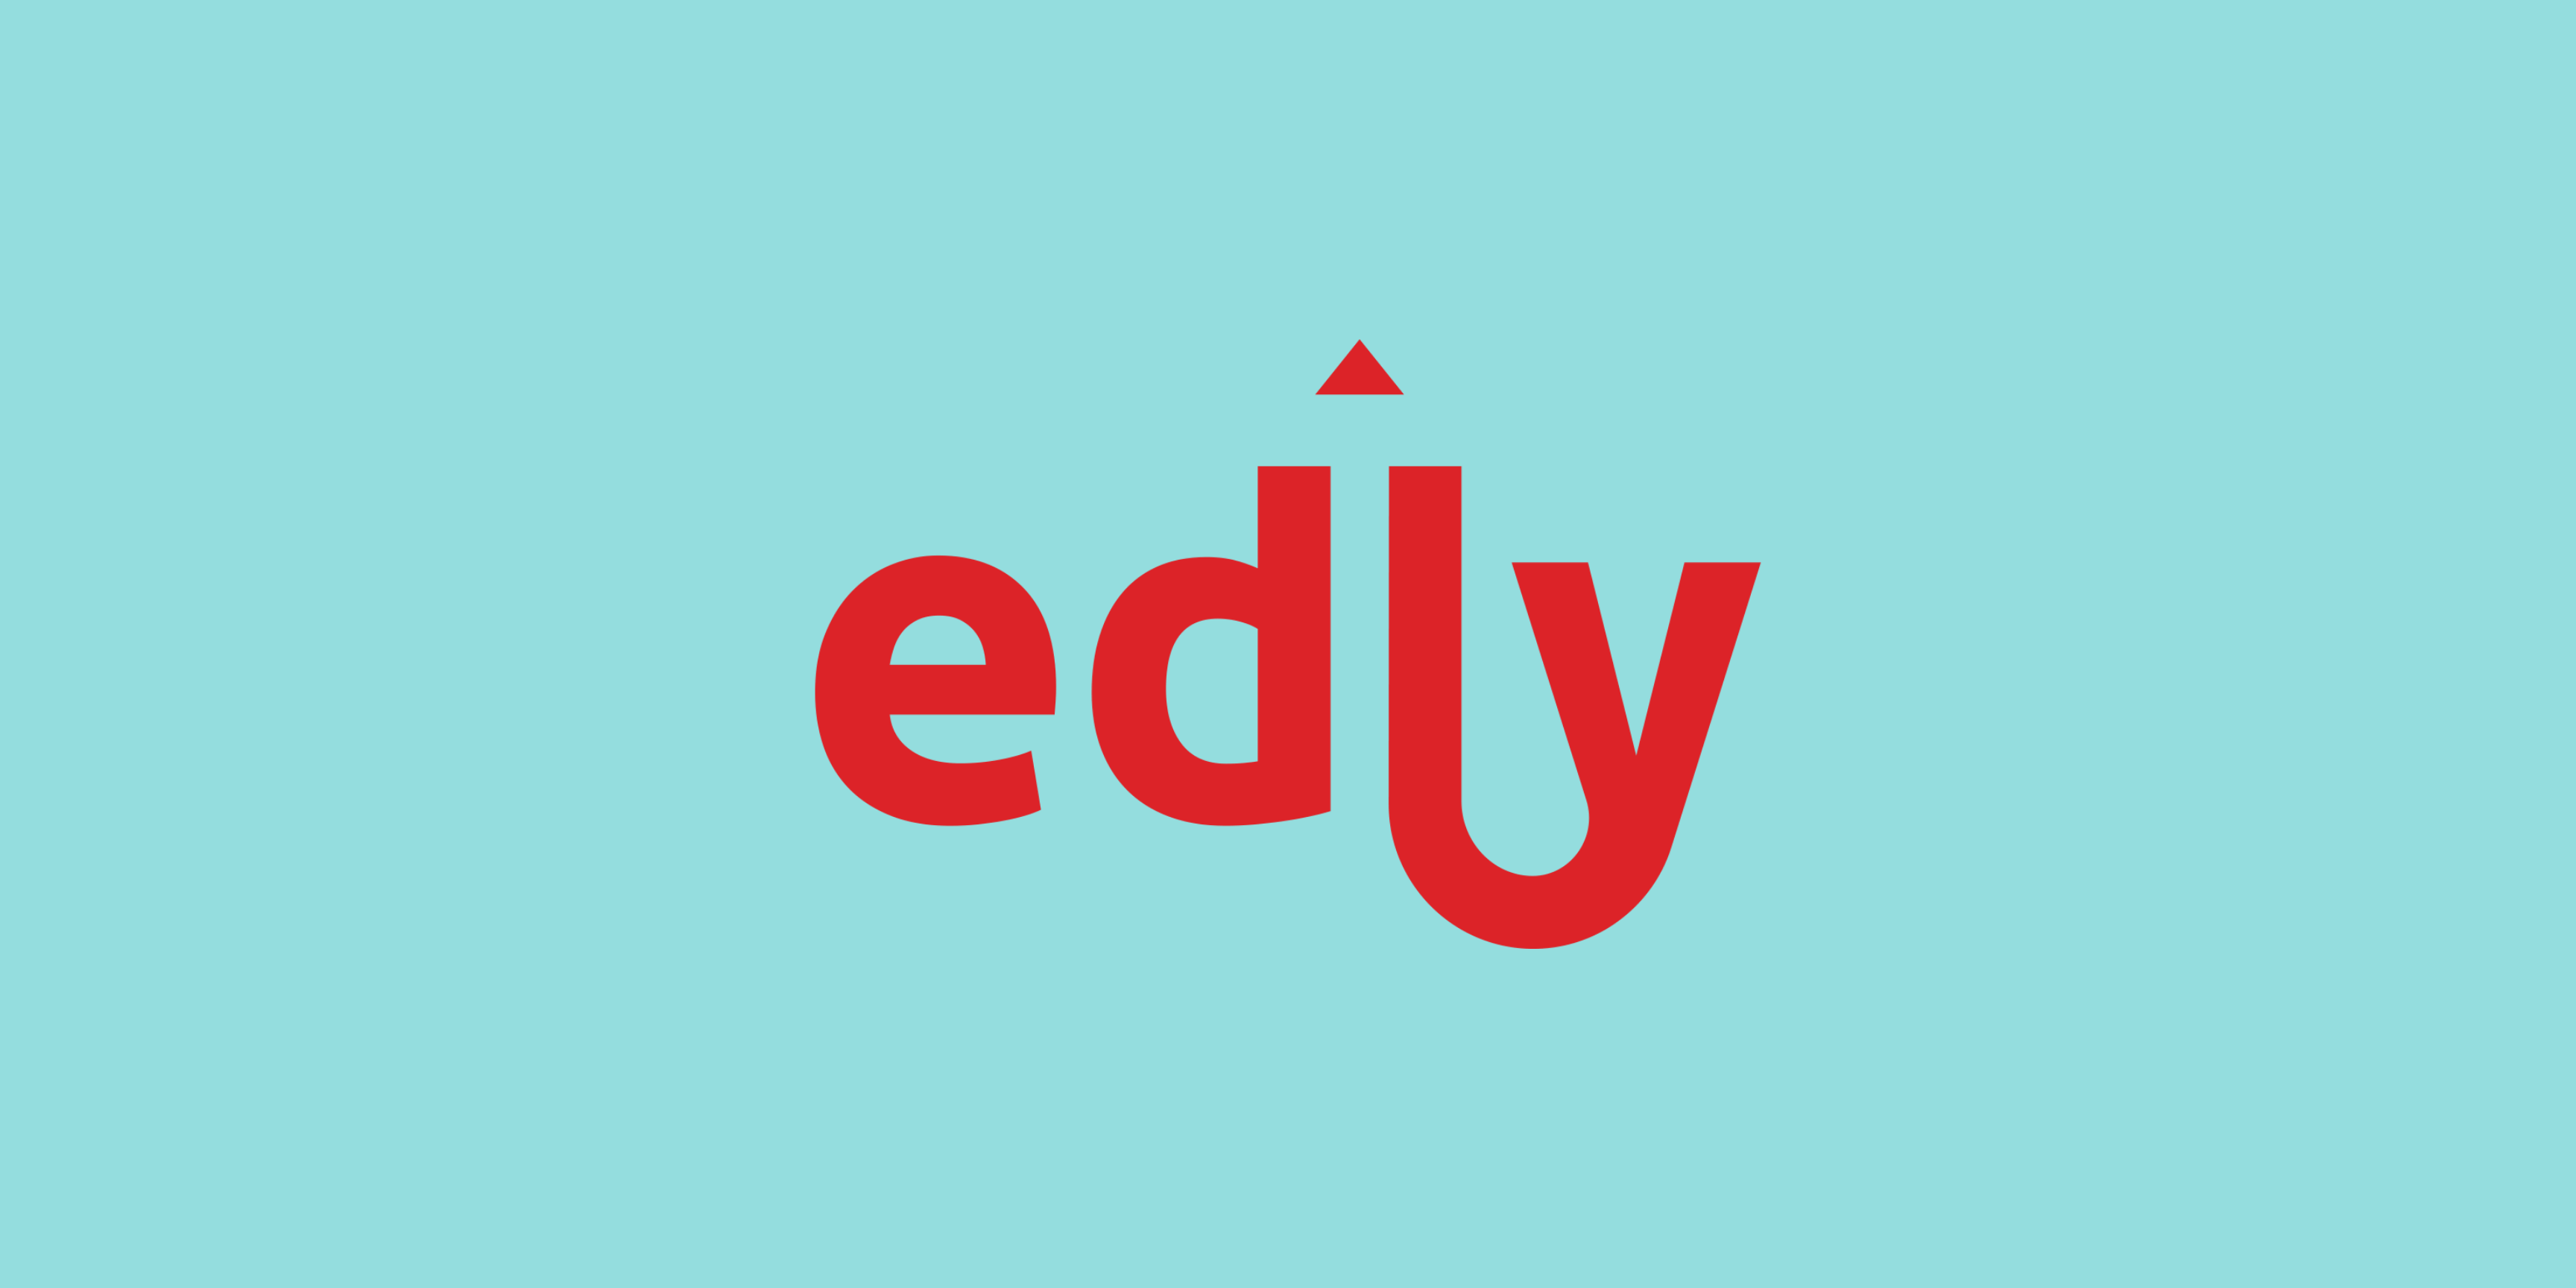 Edly Open edX Service Provider